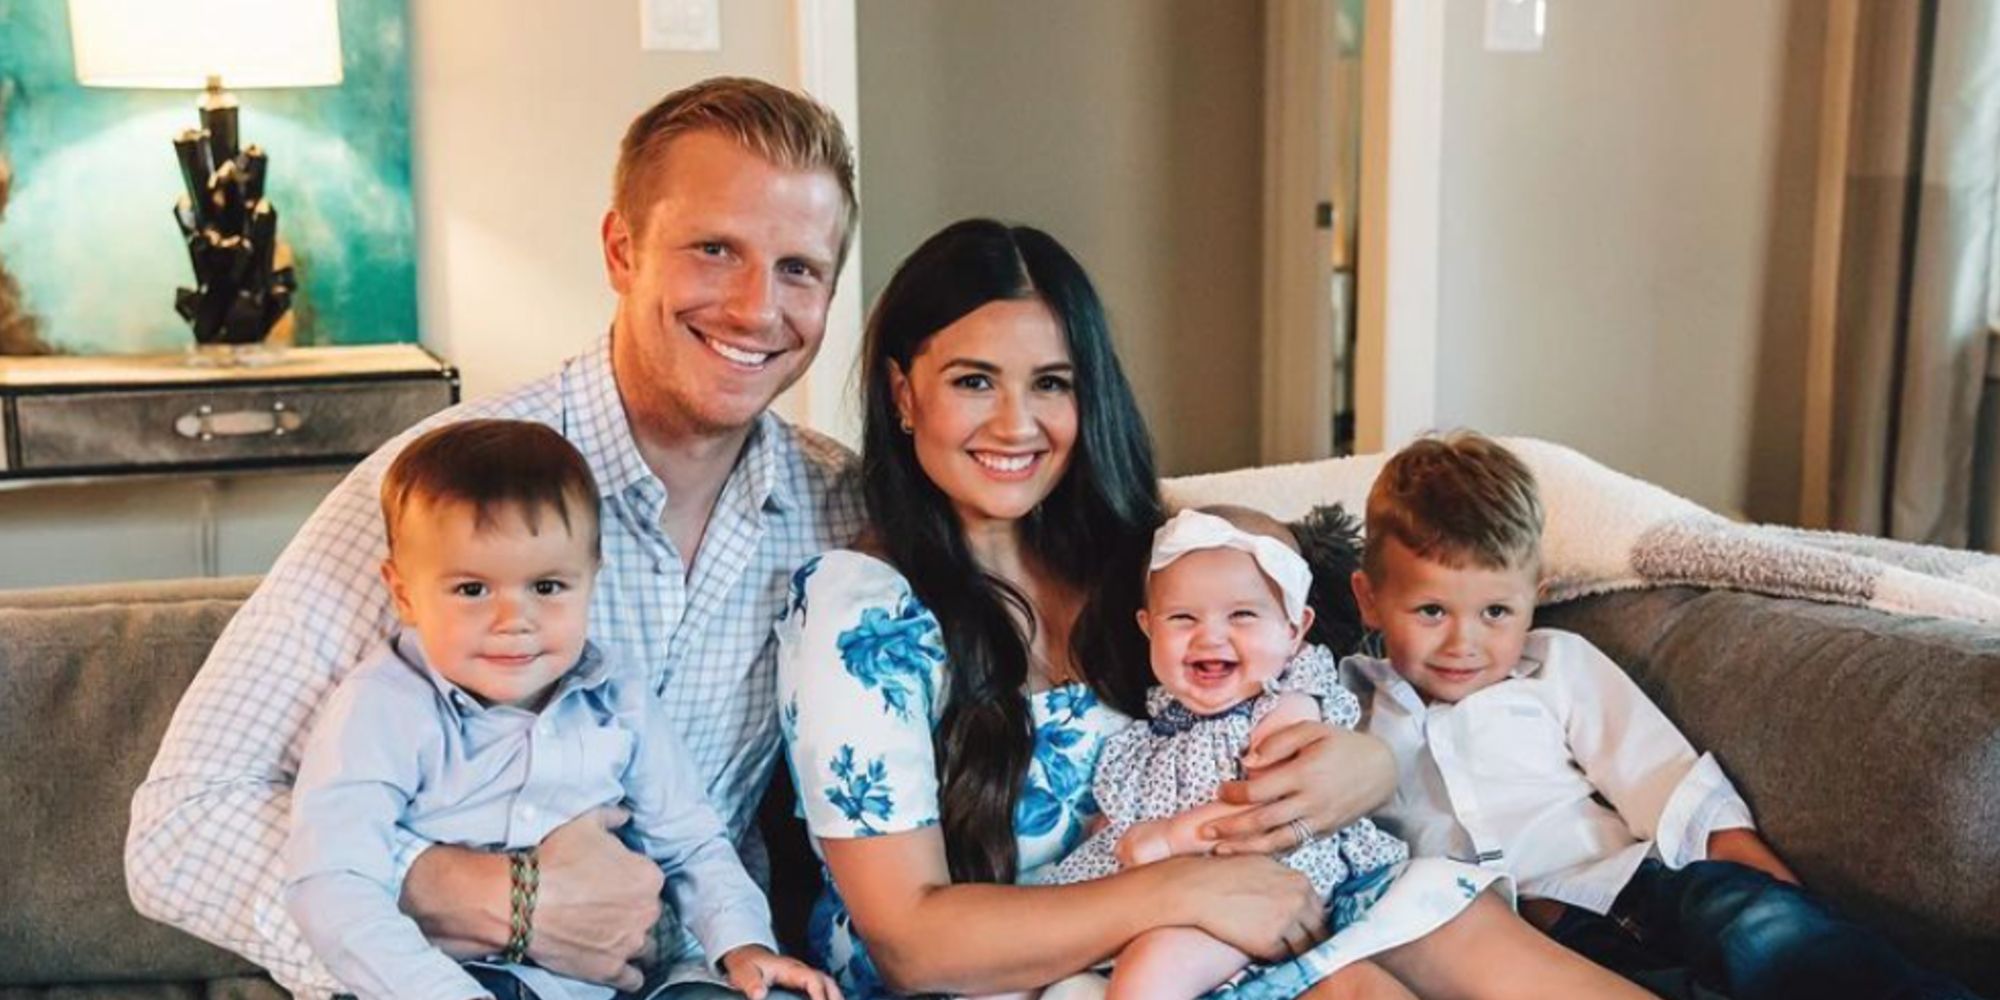 Dancing With the Stars Sean Lowe Reveals how DWTS almost Lost him Catherine Giudici!